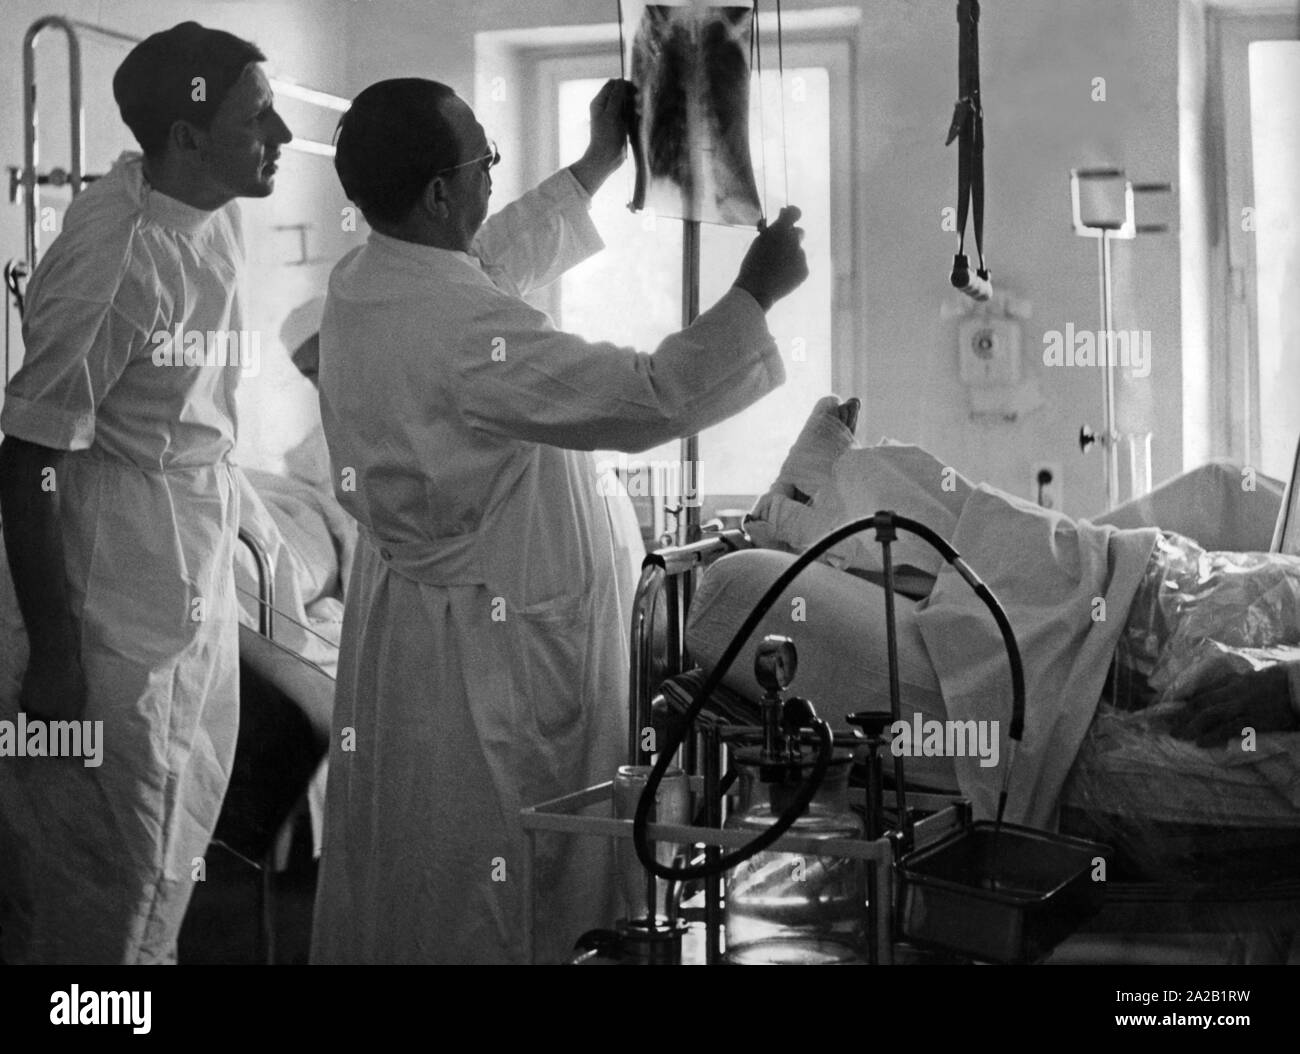 Prof. Dr. Georg Maurer (2nd from left) at the Rechts der Isar Hospital in Munich at the bed of Matt Busby, the coach of the British football team Manchester United, who was injured during a plane crash at the airport Riem on 06.02.1958. Stock Photo